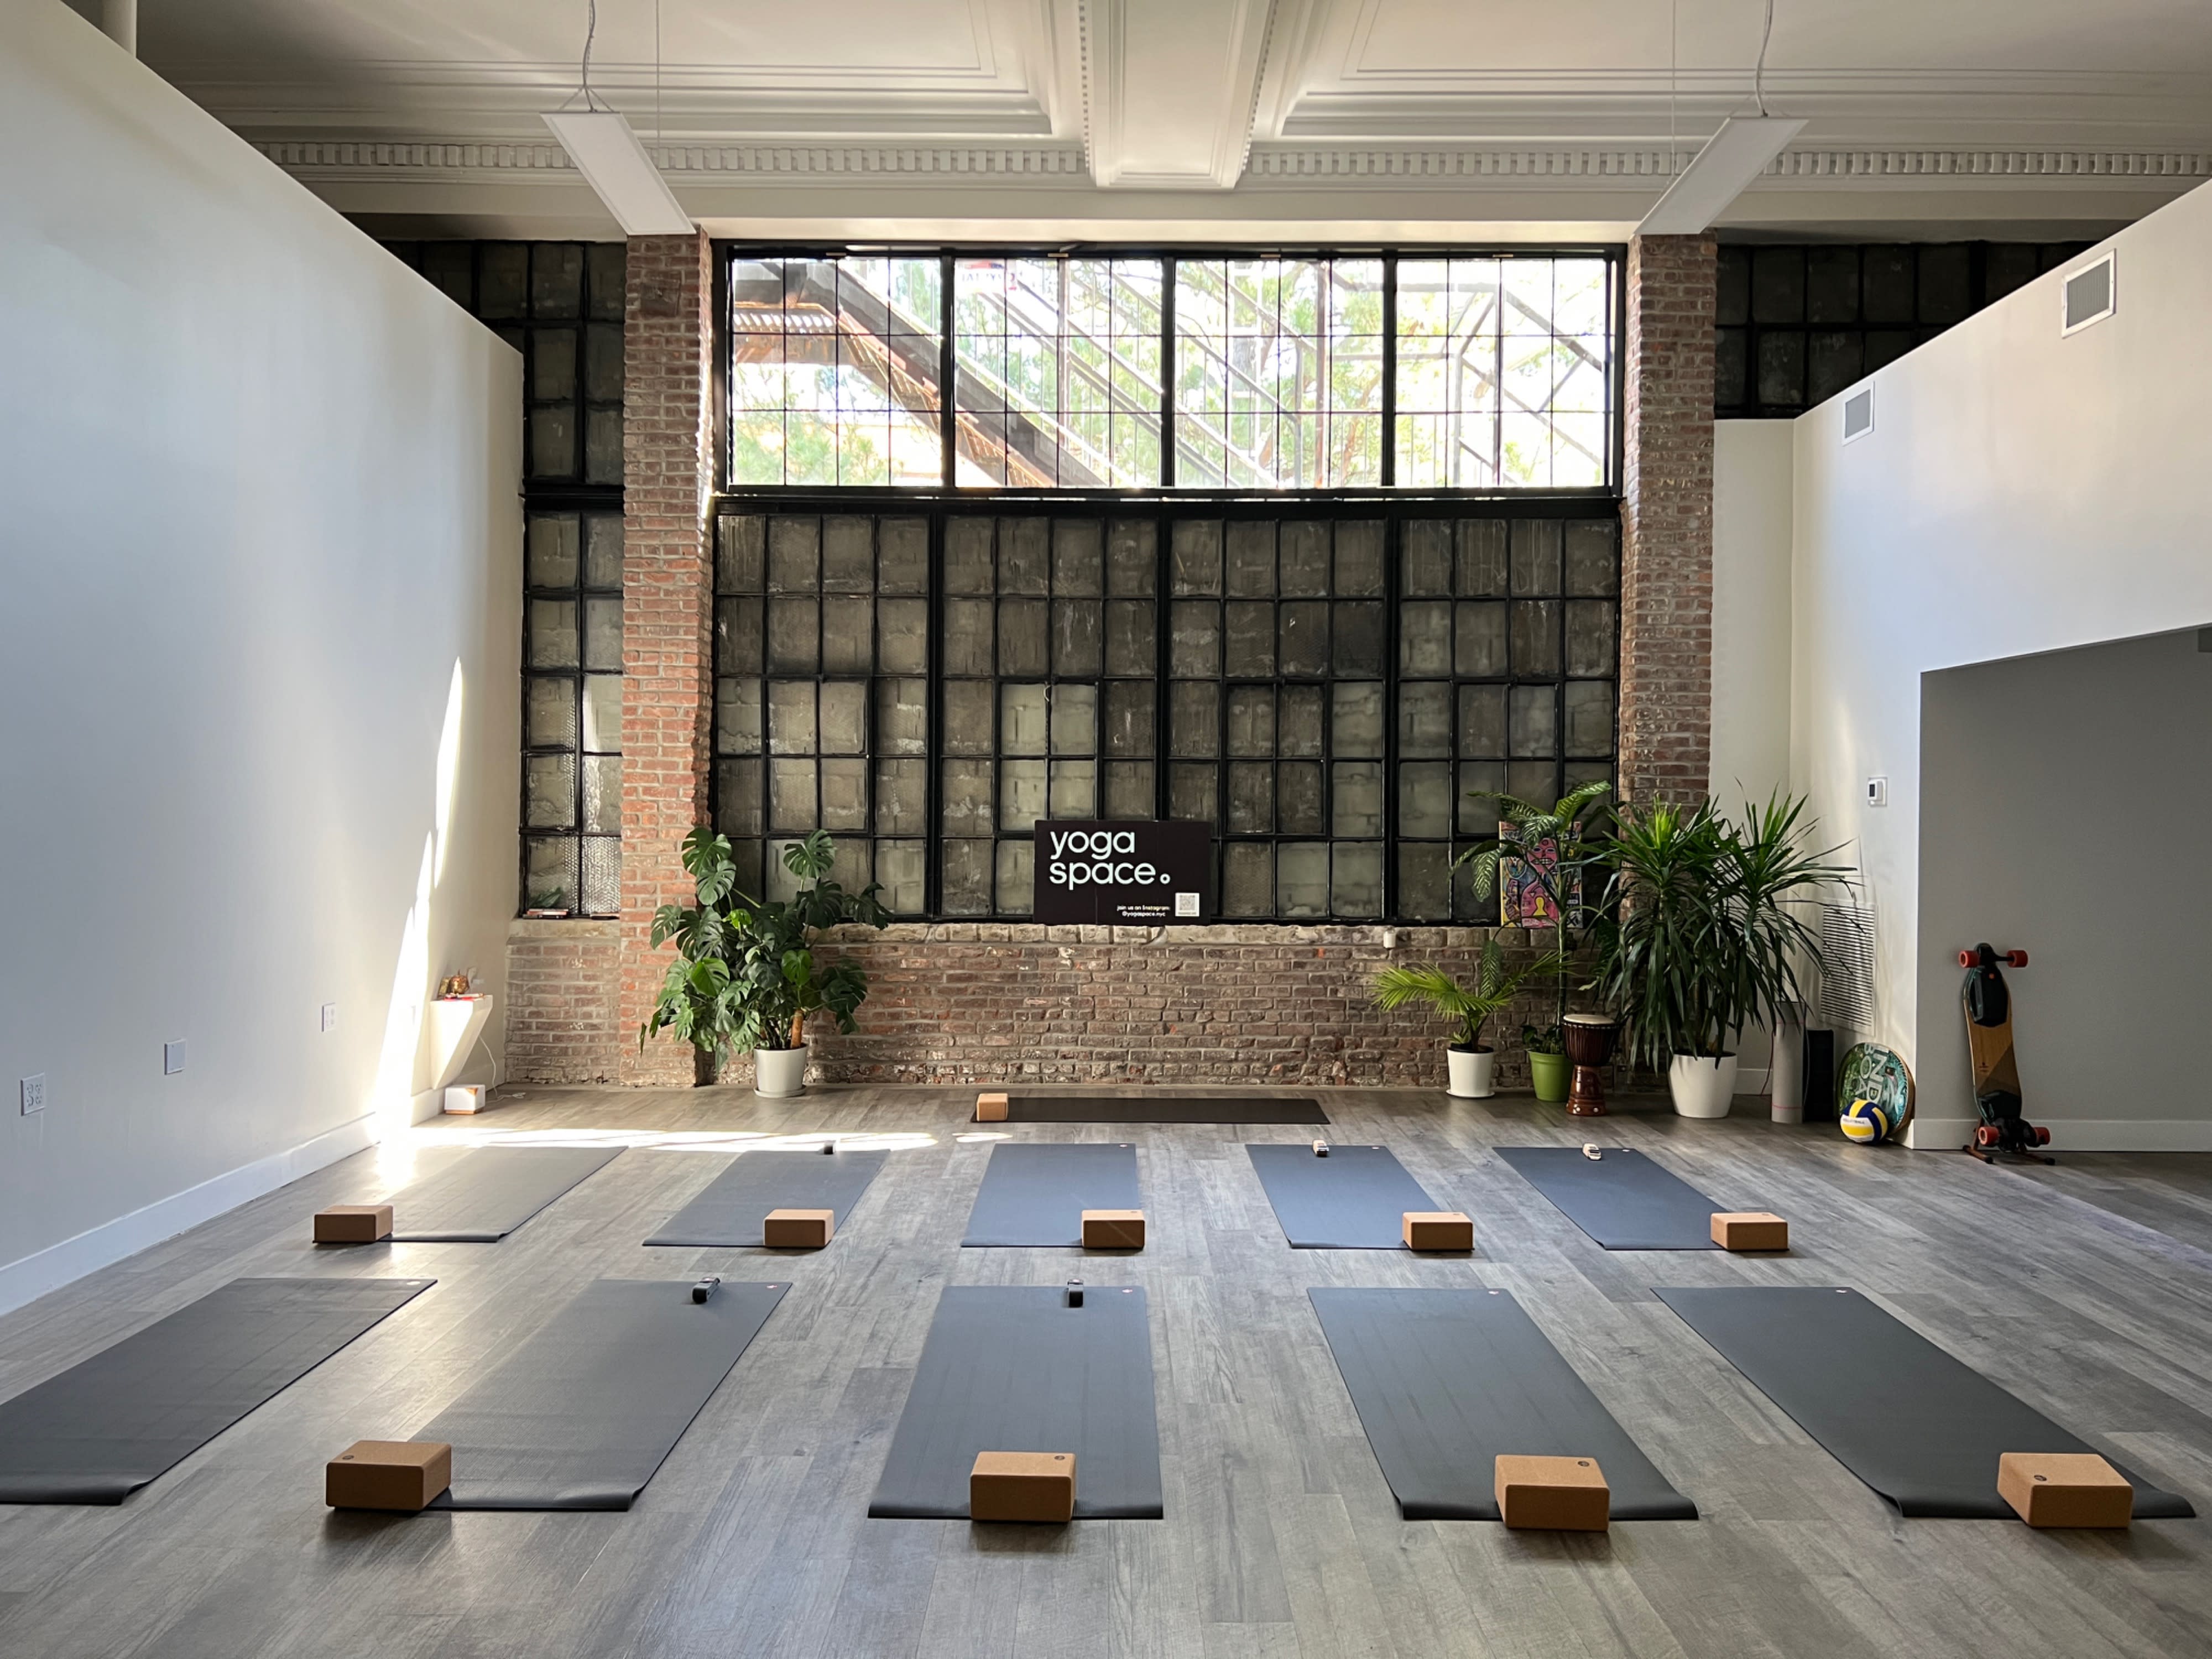 Authentic Yoga Studio in the Heart of a Greenpoint, Brooklyn, NY